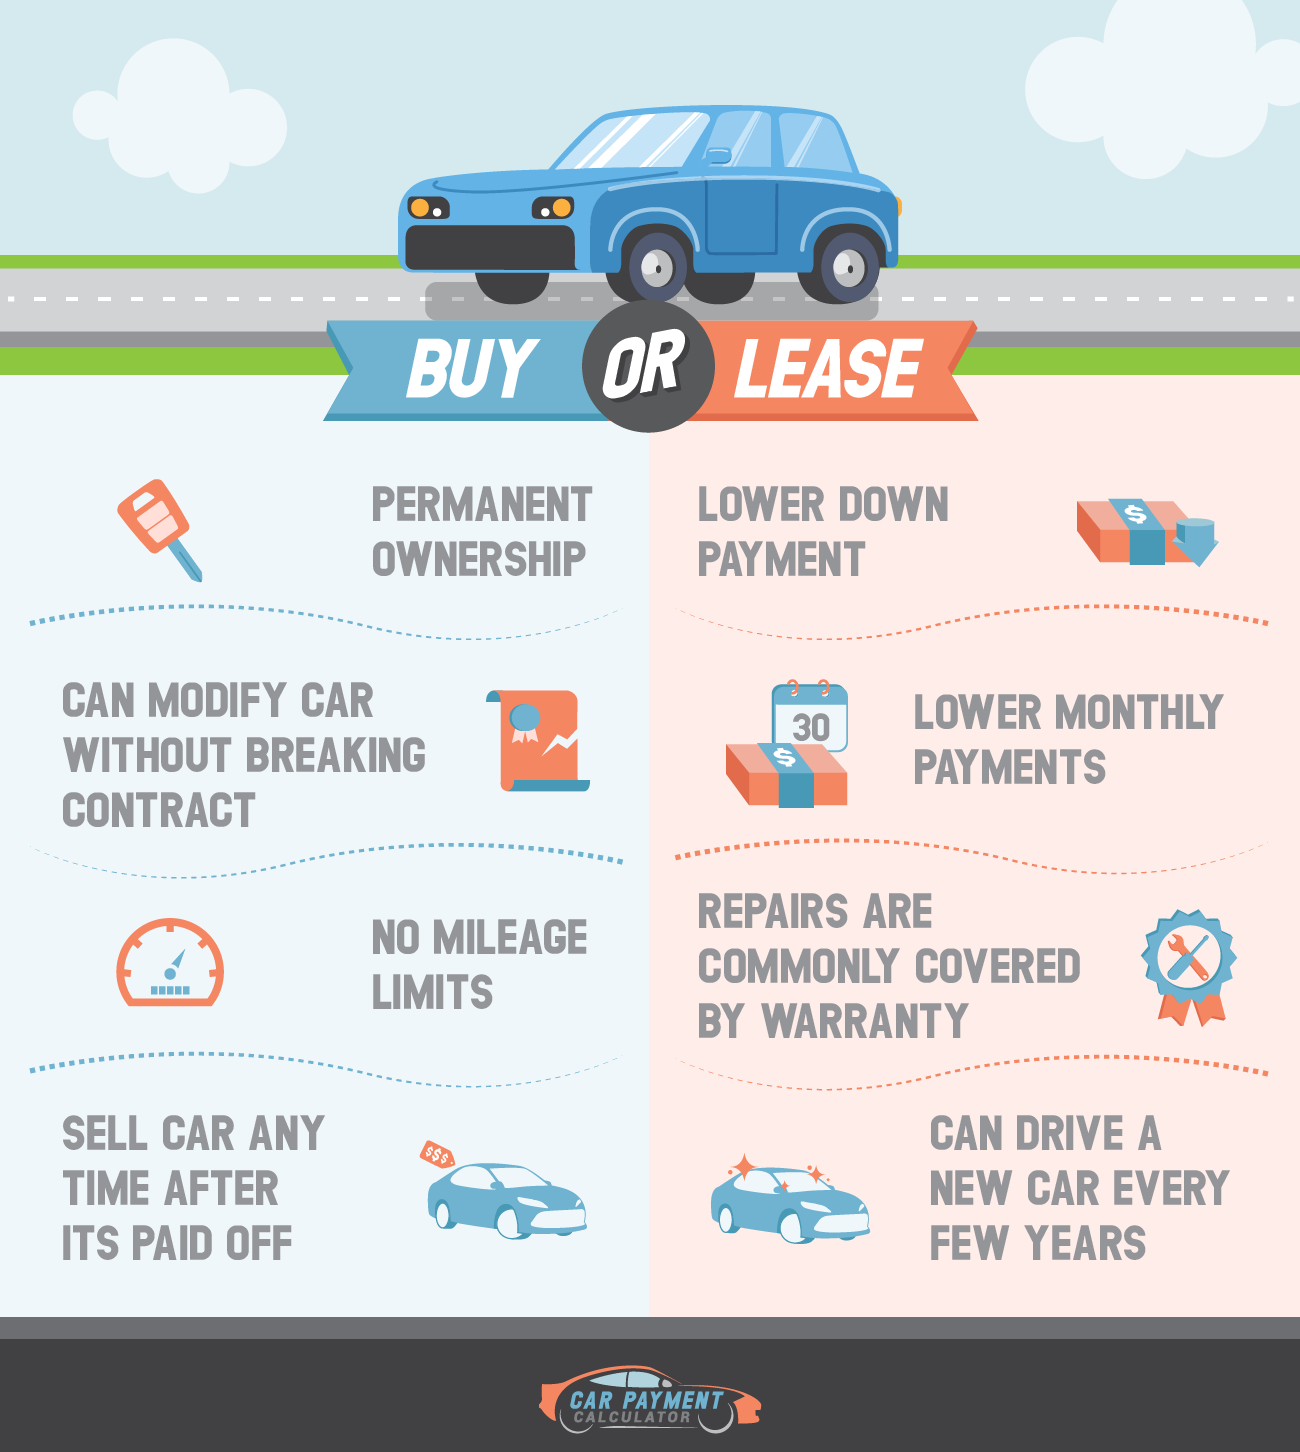 Should You Lease or Buy Car For Business? (+ Charts)